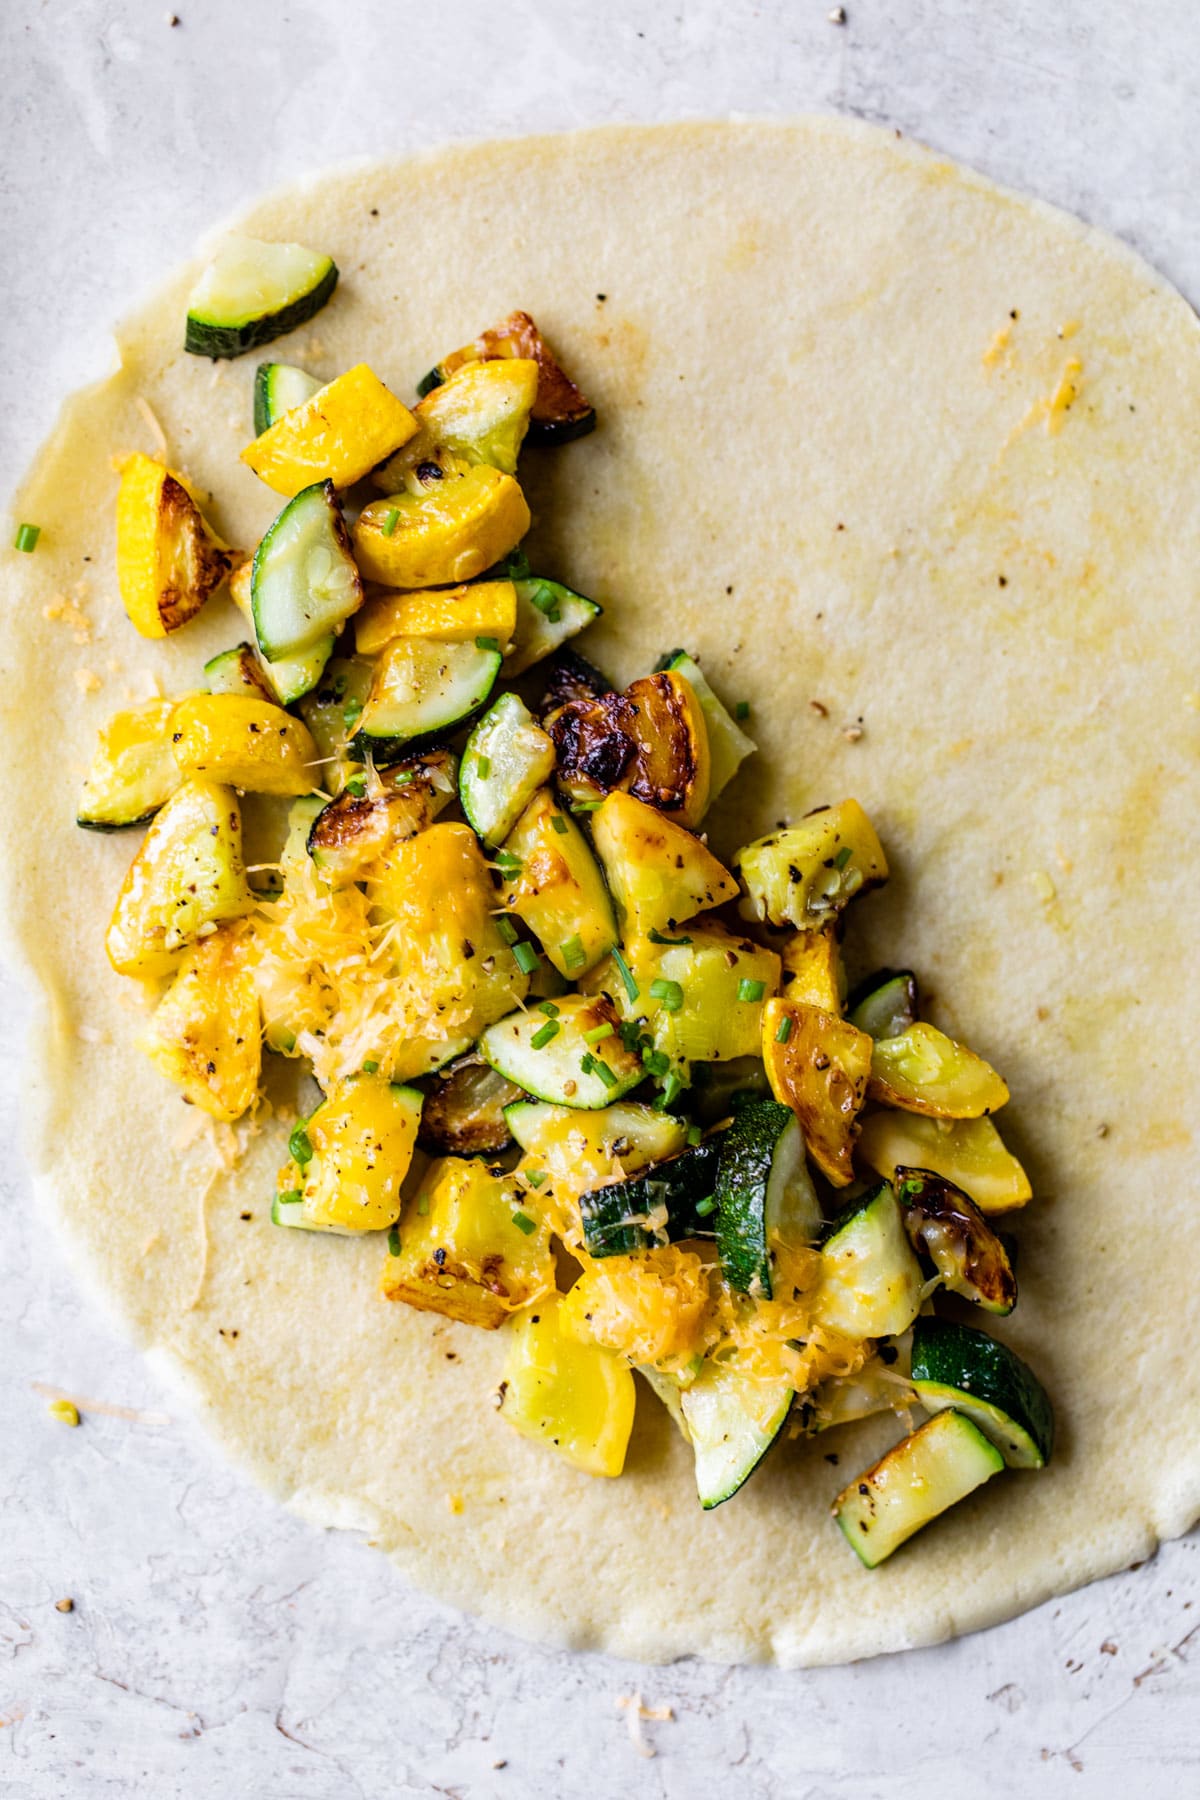 zucchini and squash on a crepe topped with cheese